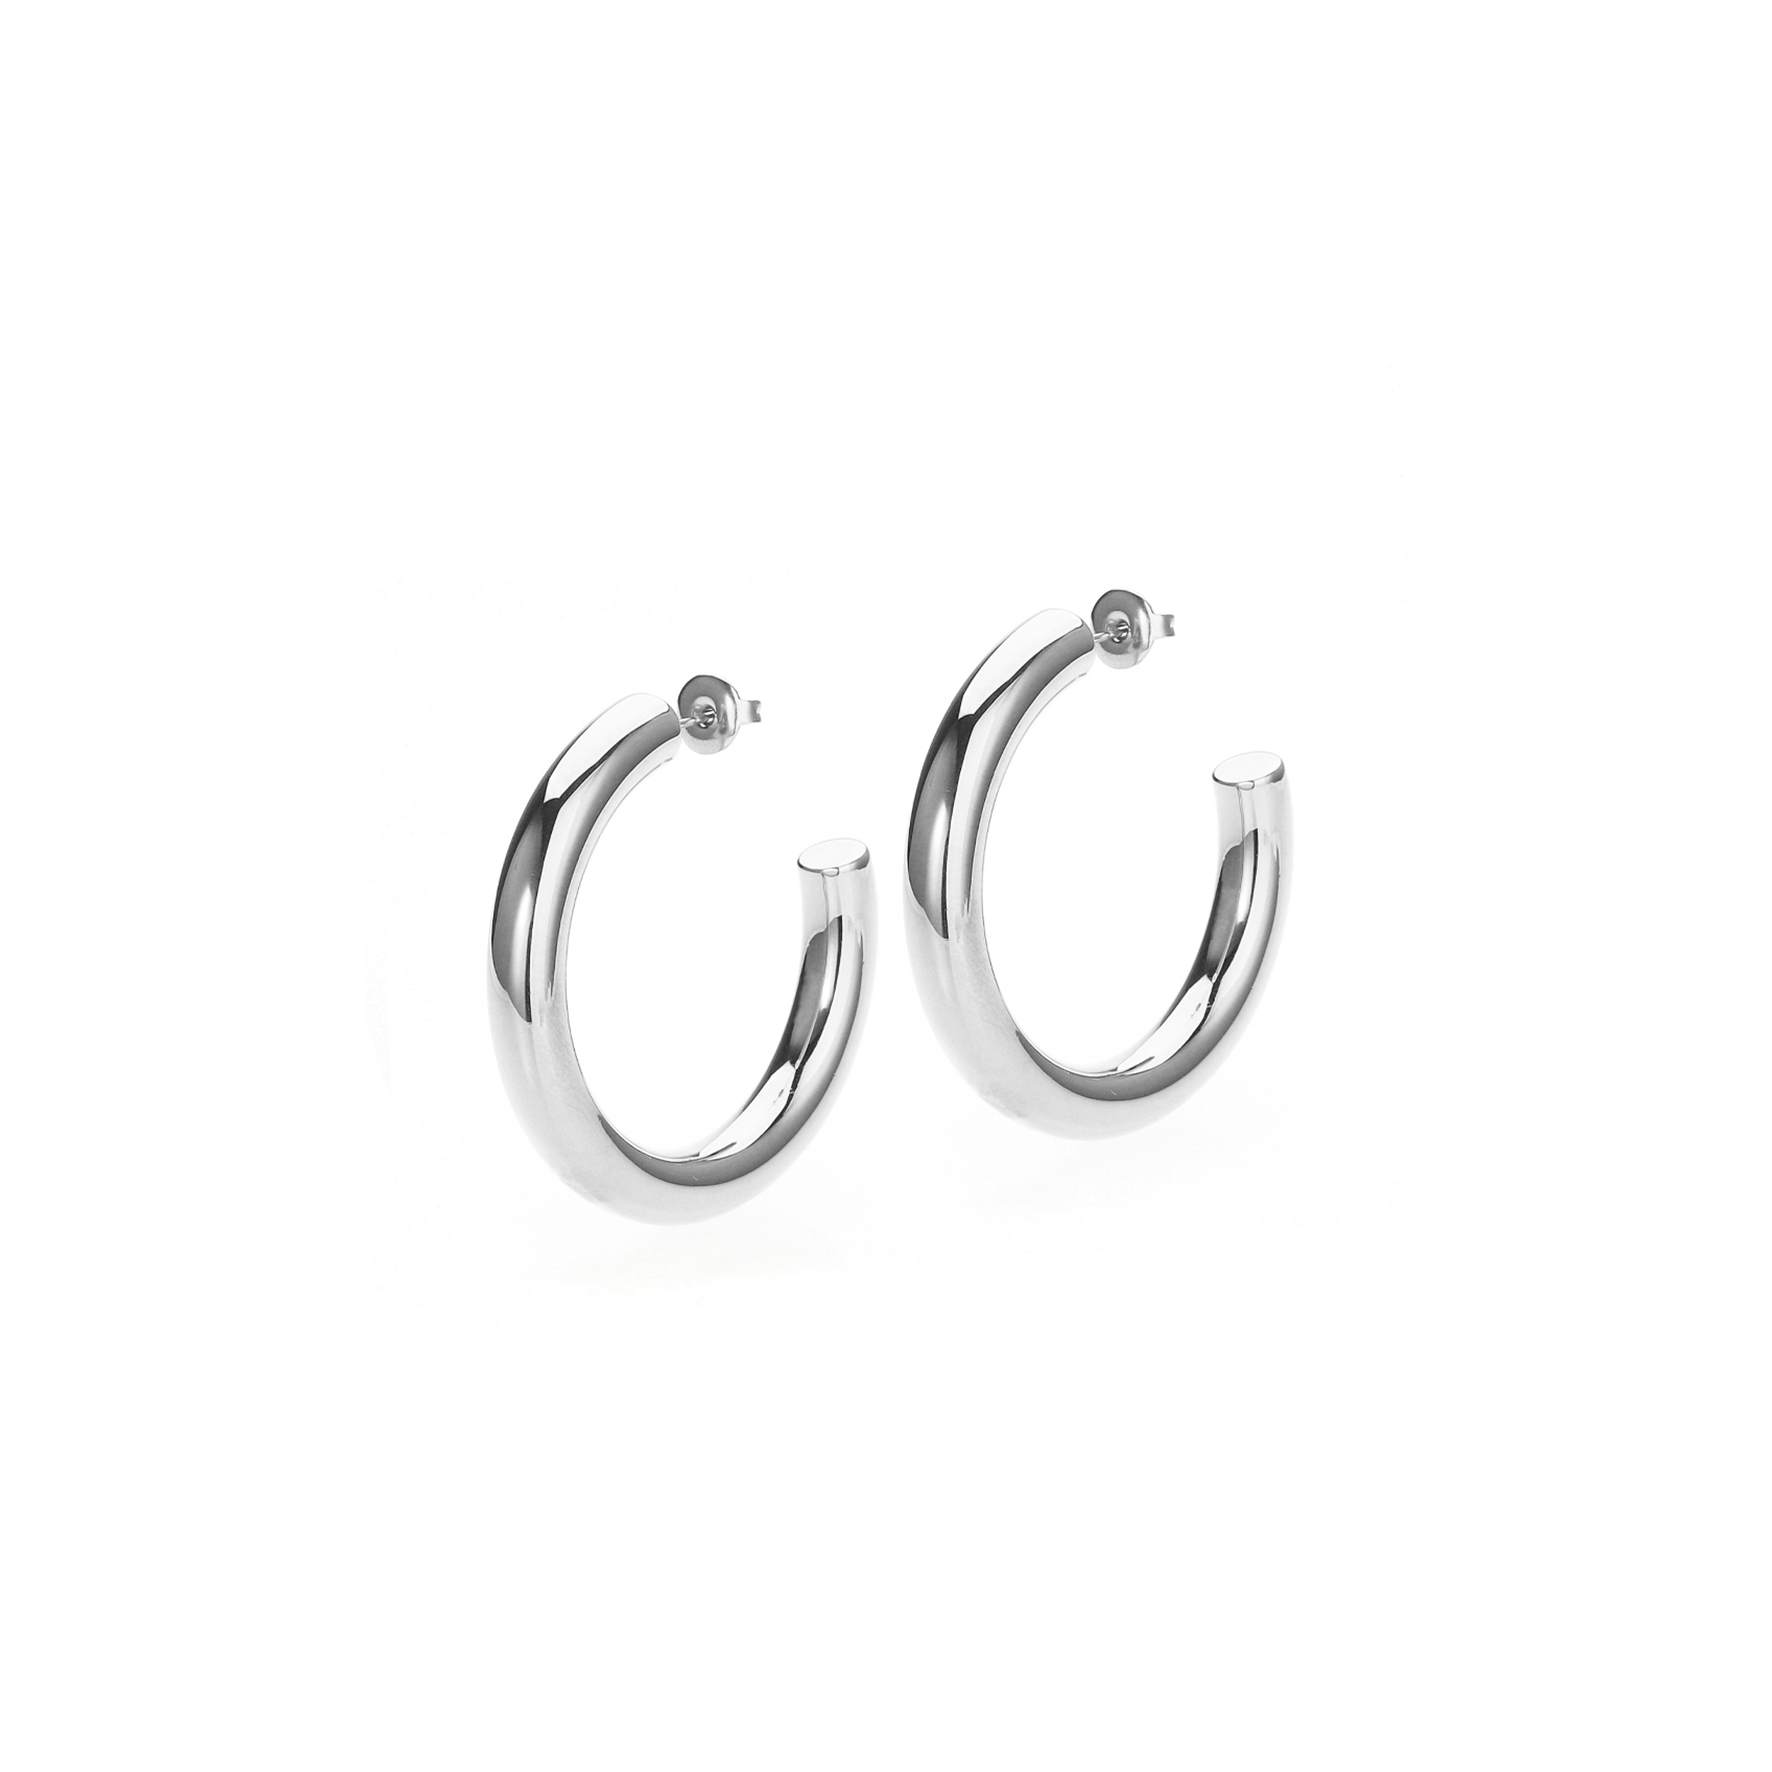 Aura Large Hoops from Sistie 2nd in Stainless steel